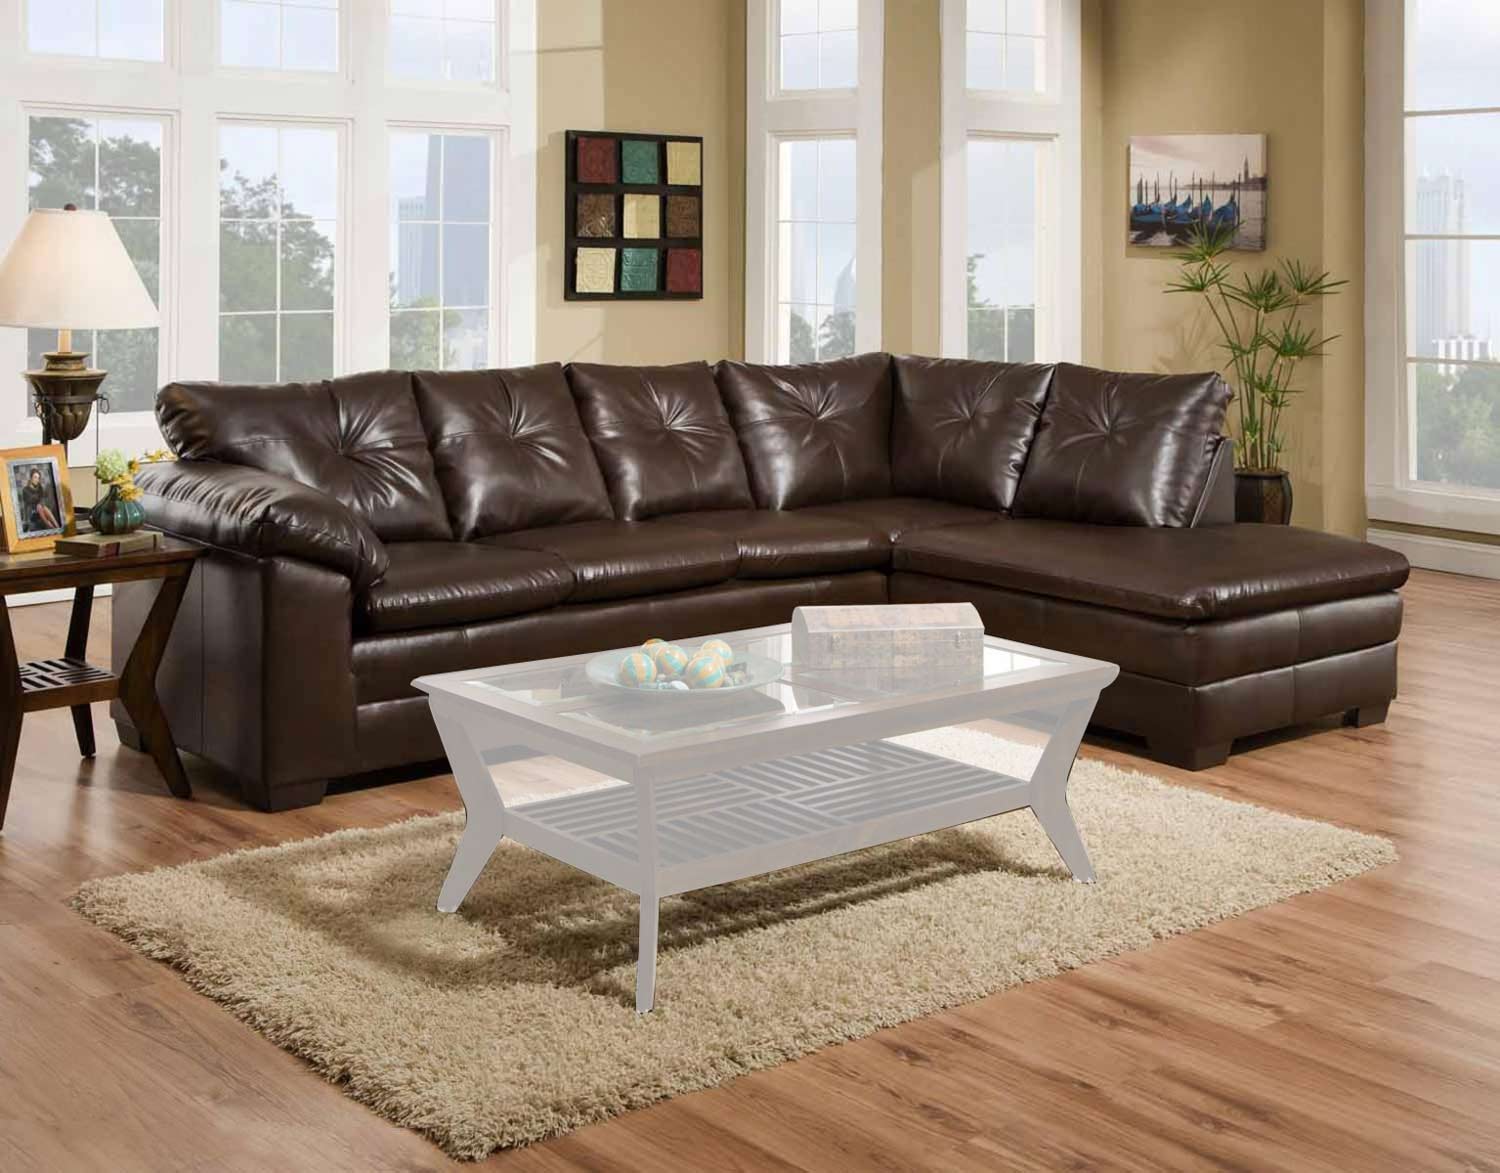 Chelsea Home Rho 2 Piece Sectional Sofa - Freeport Brown